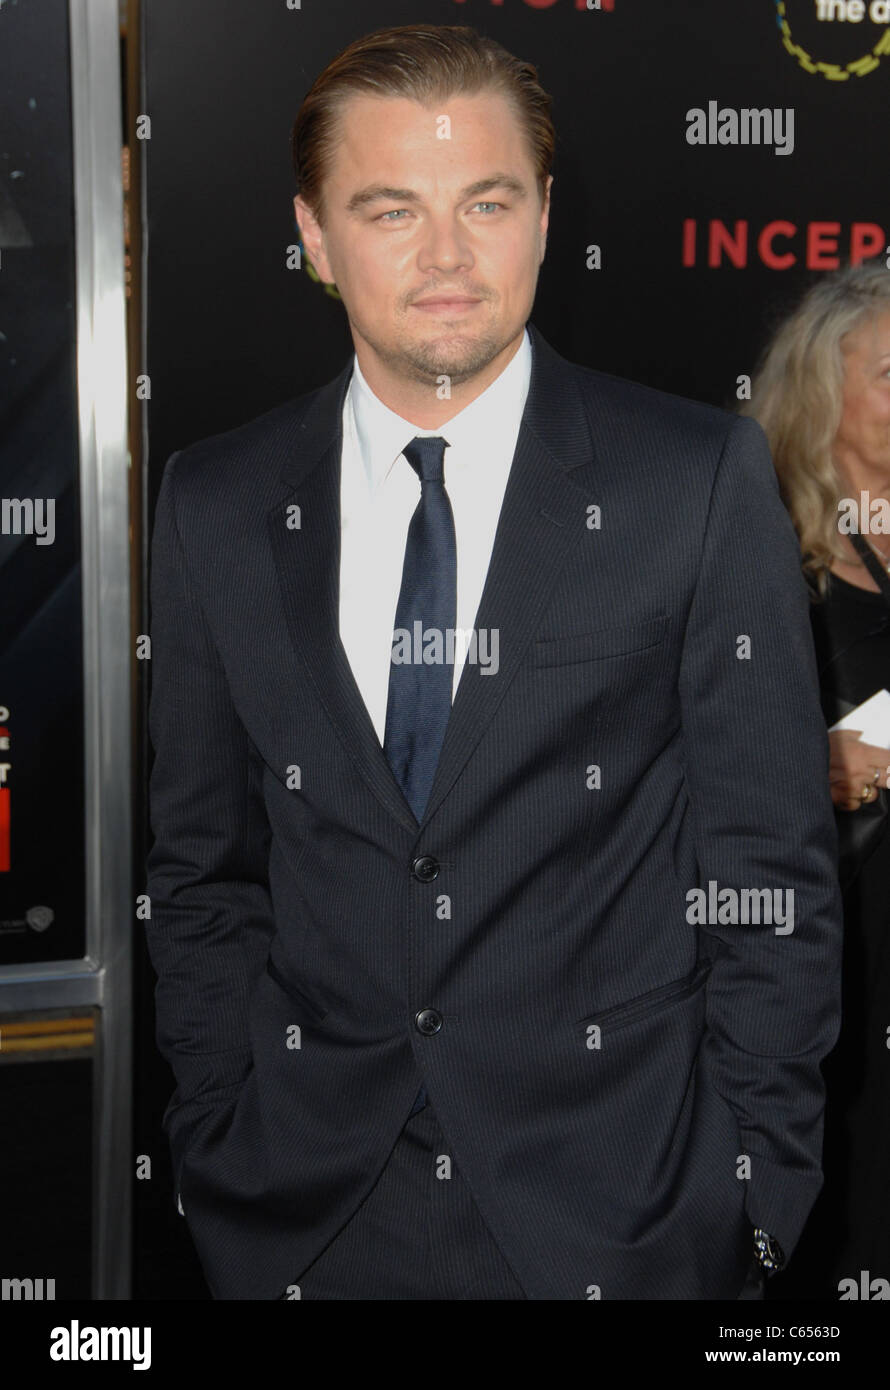 Leonardo Dicaprio at arrivals for INCEPTION Premiere, Grauman's Chinese Theatre, Los Angeles, CA July 13, 2010. Photo By: Dee Cercone/Everett Collection Stock Photo